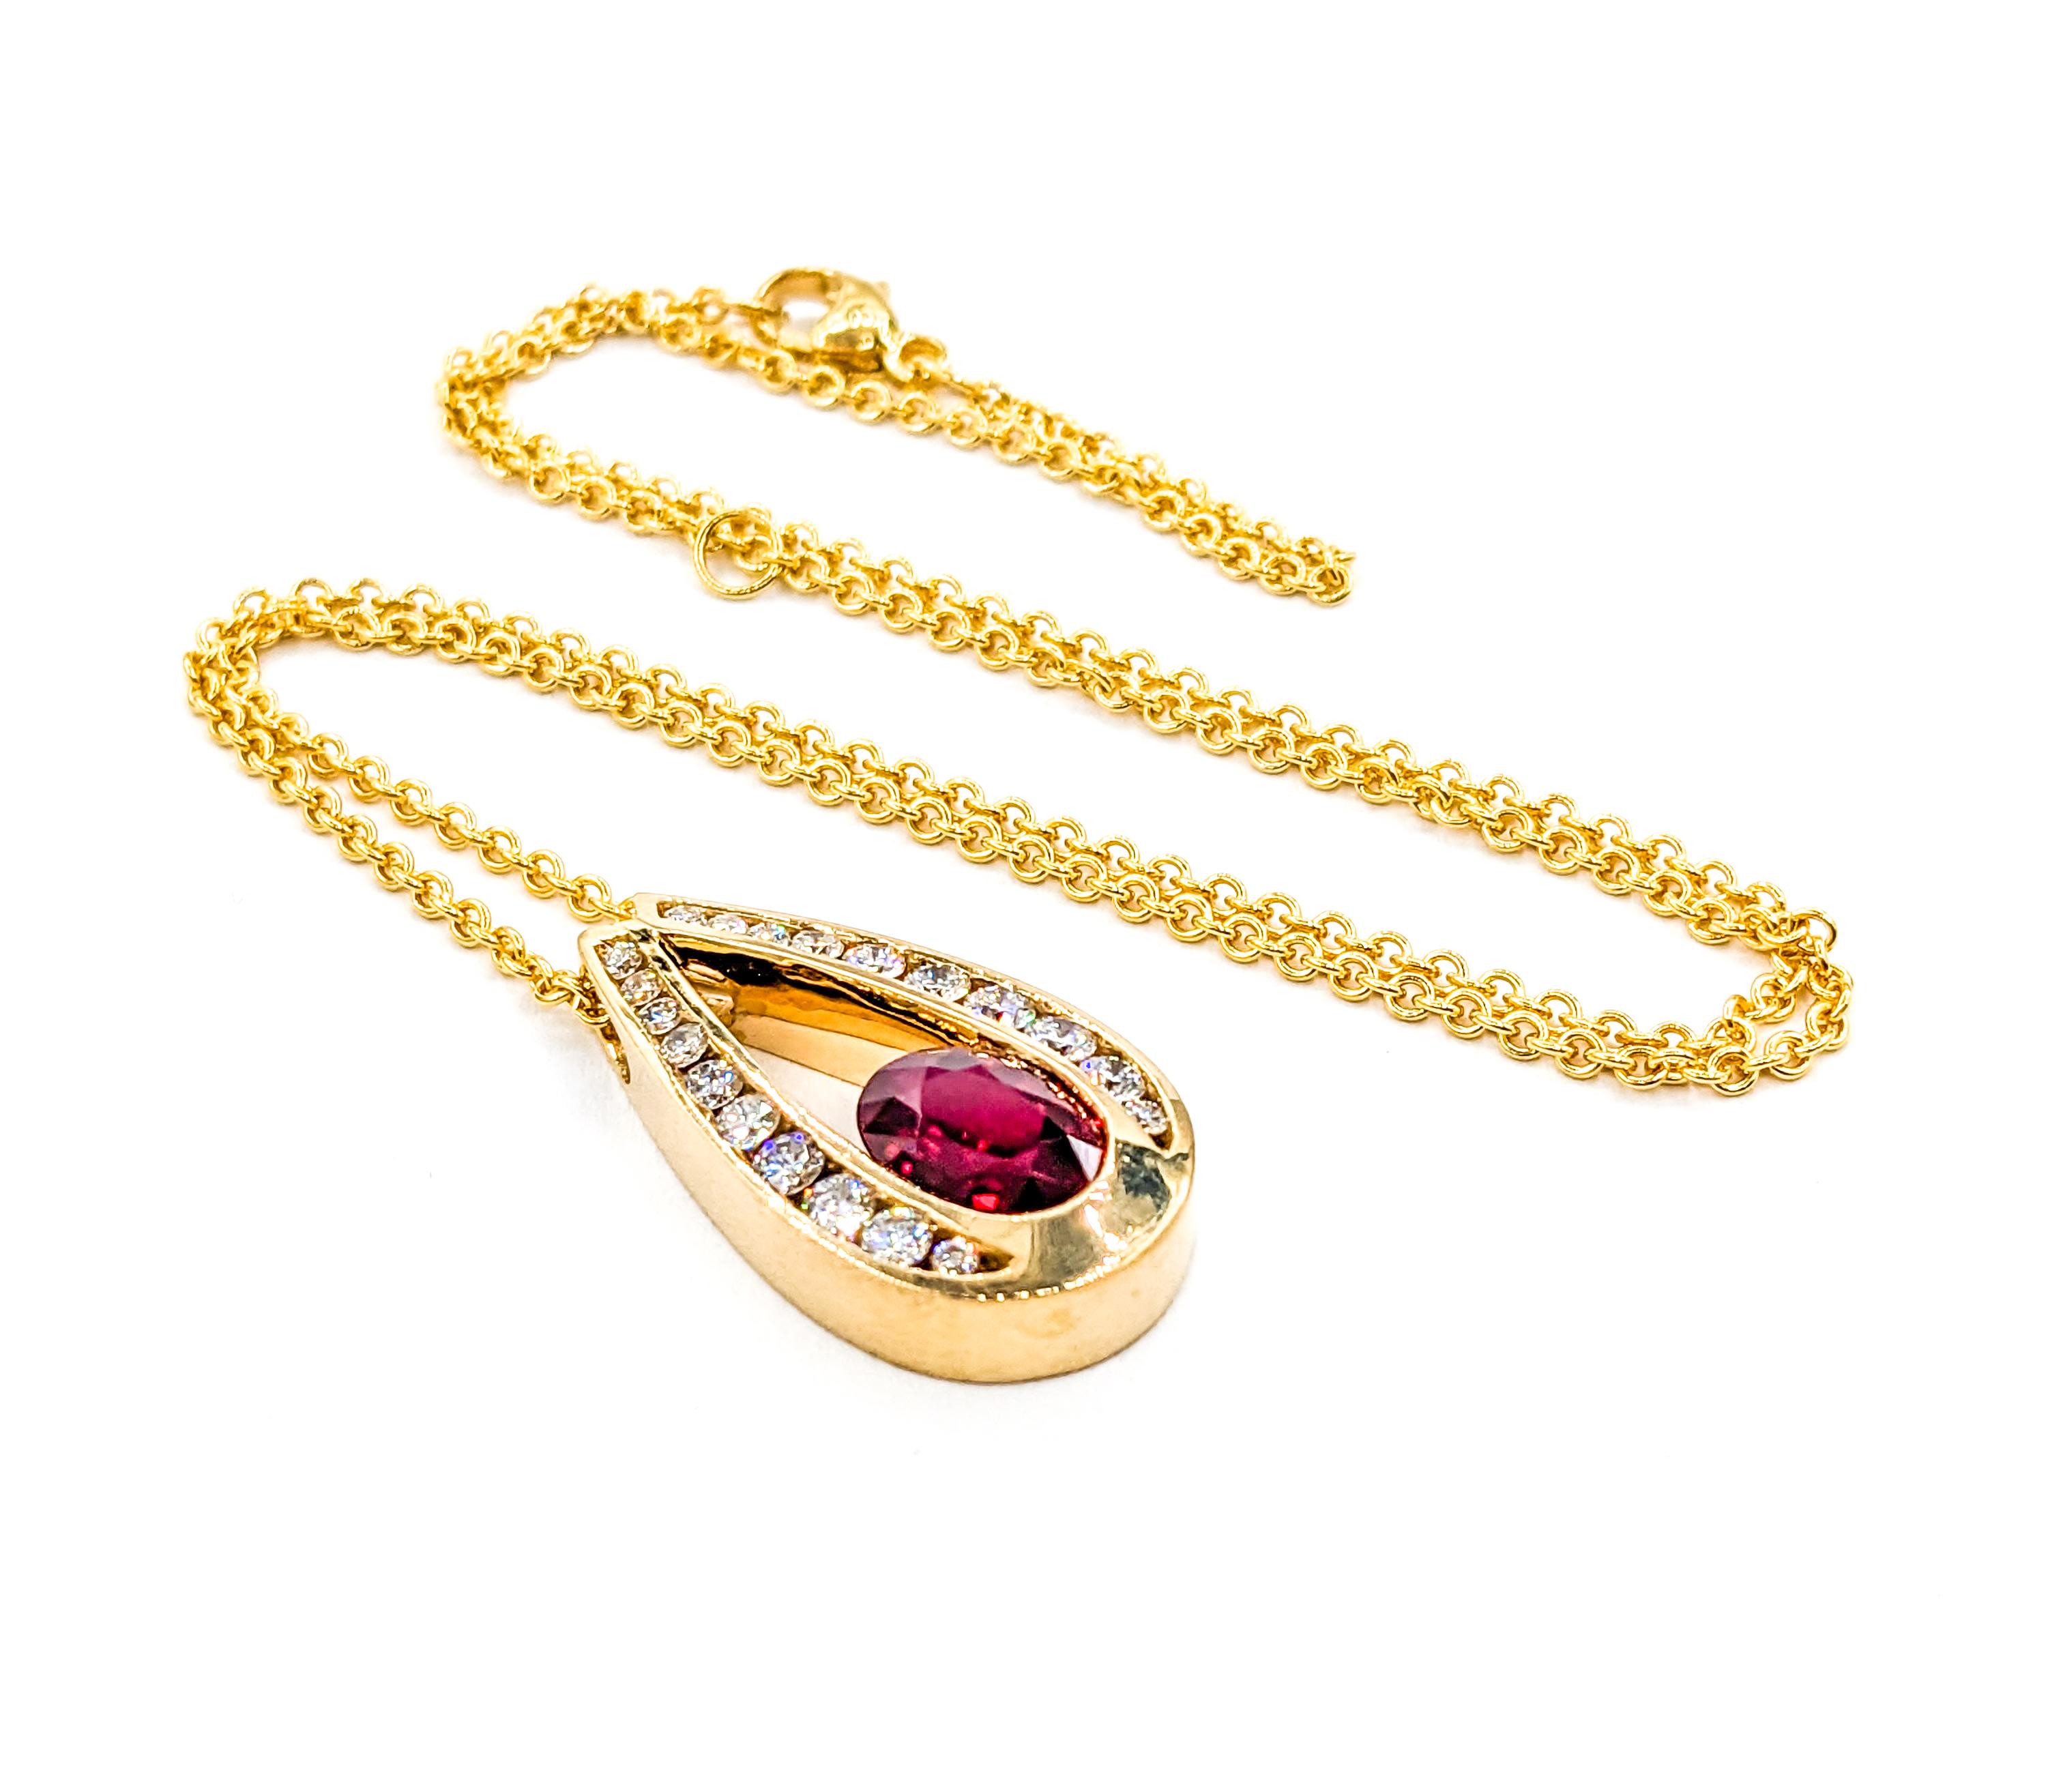 Oval Cut GIA 1.84ct Pigeons Blood Natural Burmese Ruby & Diamond Pendant With Chain For Sale